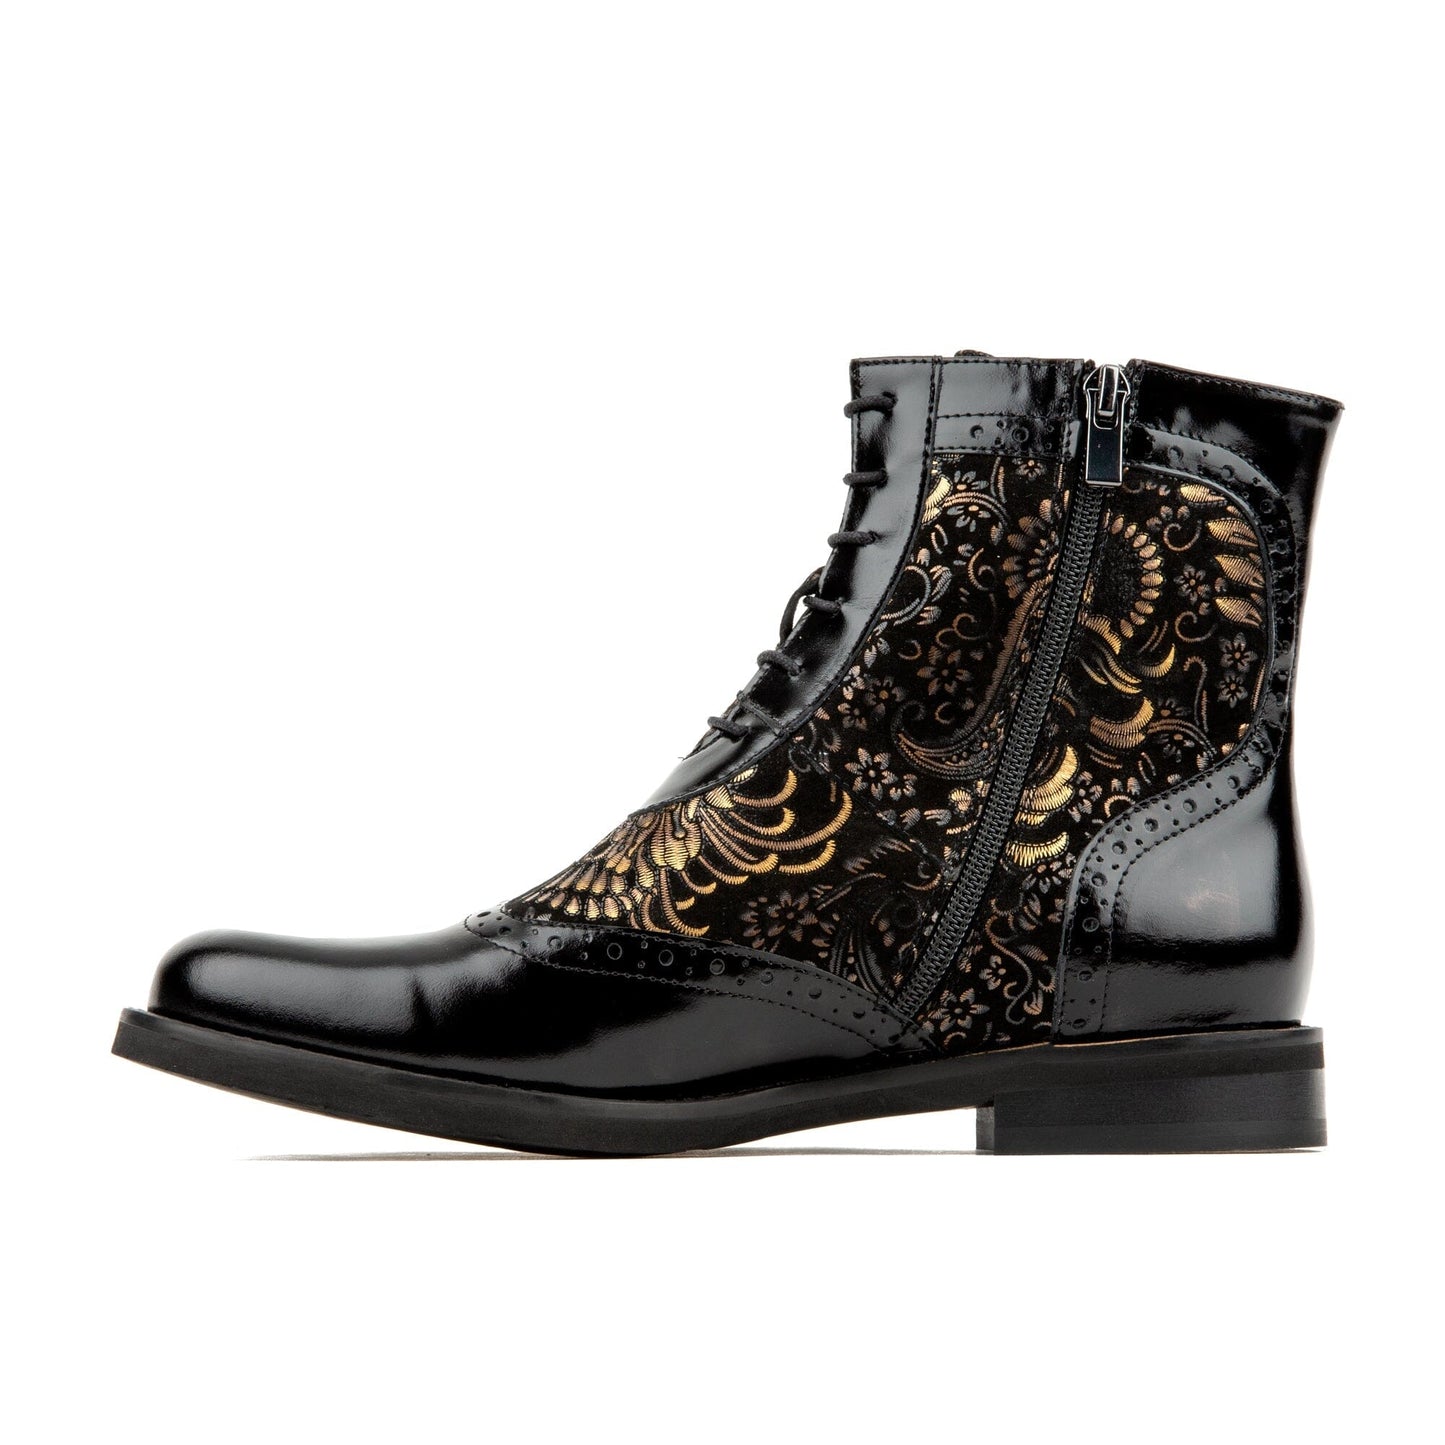 Mantis - Black & Gold Ankle Boots Embassy London 